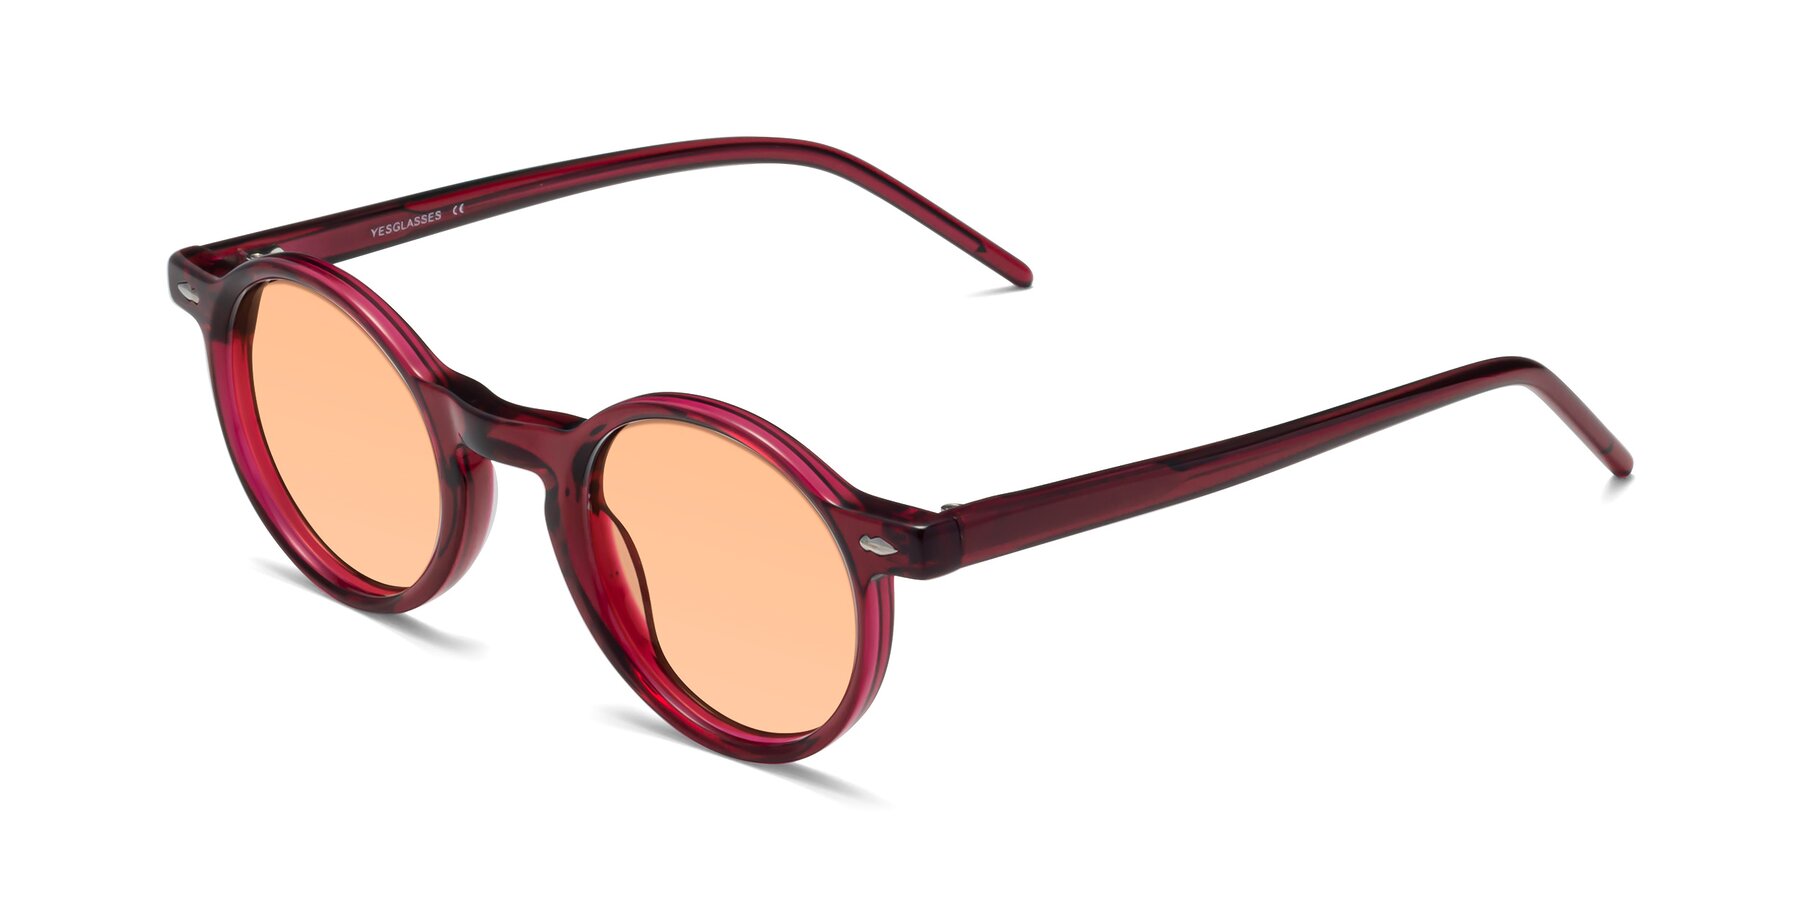 Angle of 1542 in Plum with Light Orange Tinted Lenses